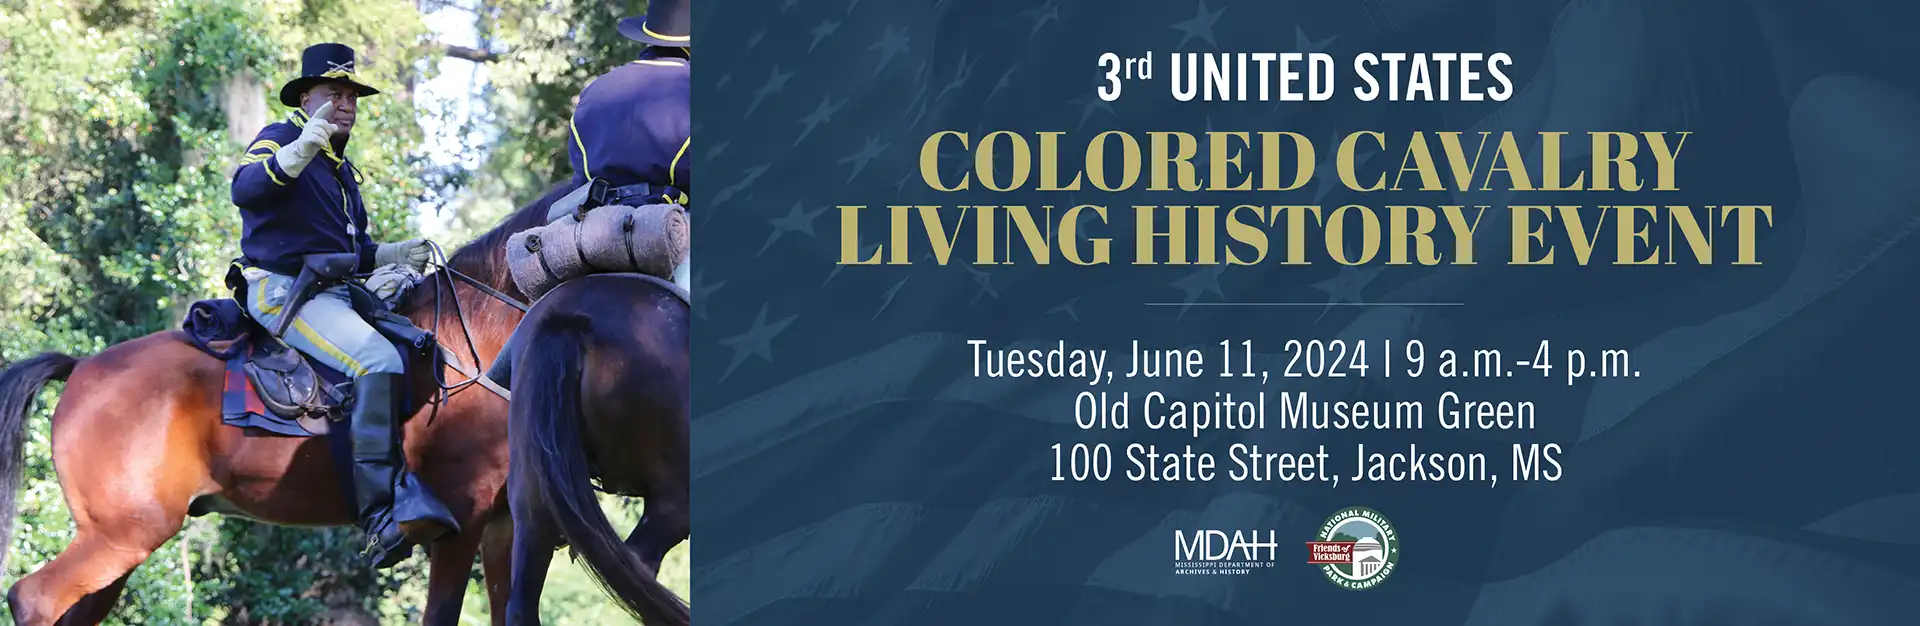 3rd United States Colored Cavalry Living History Event, June 11, 2024